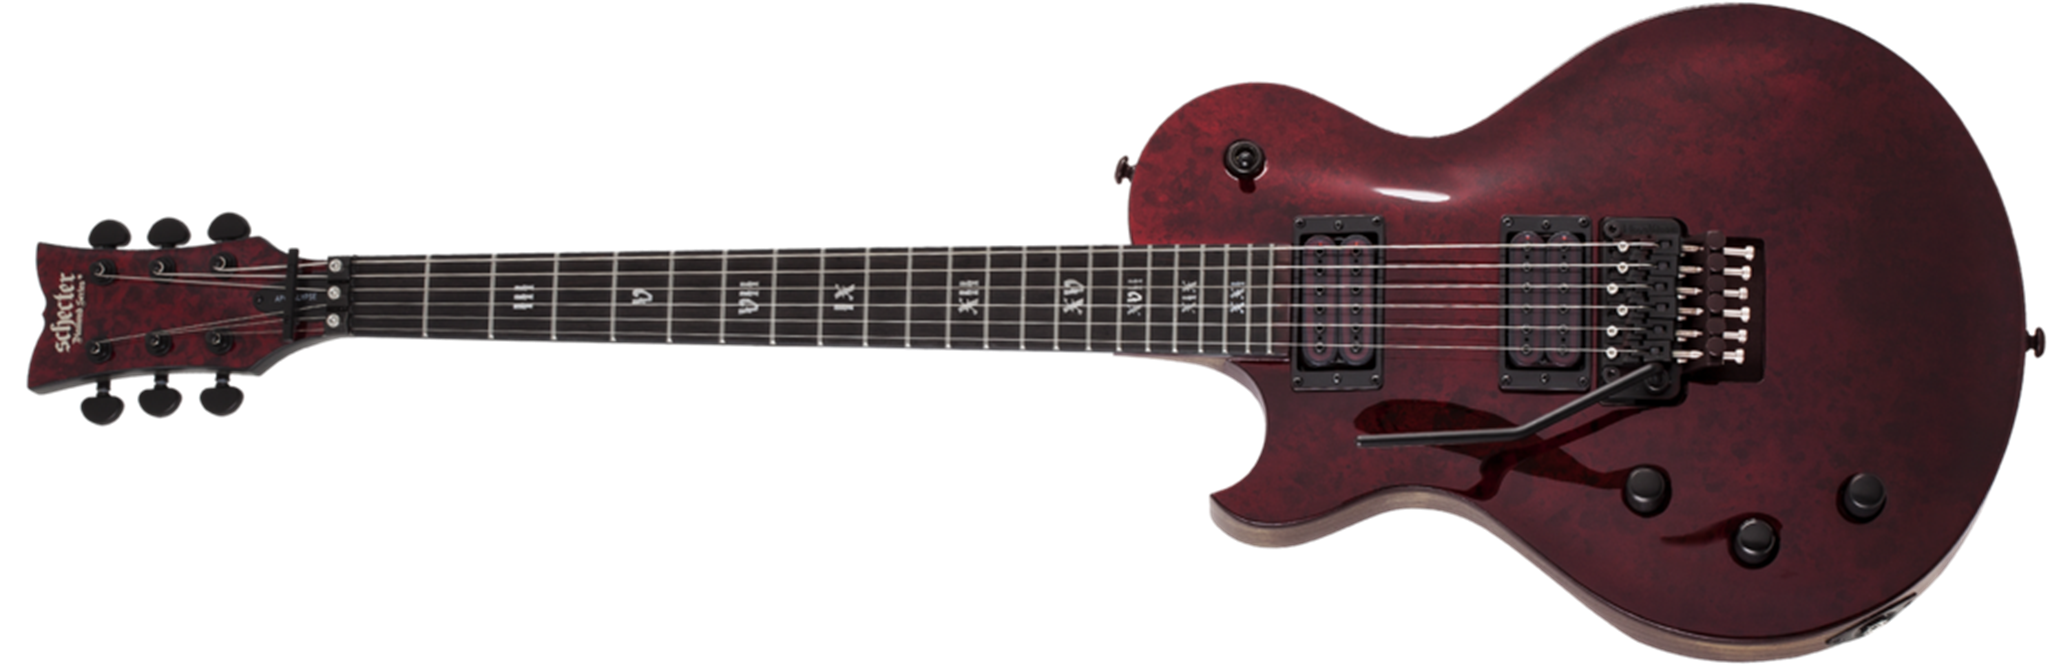 Schecter DIAMOND SERIES Apocalypse Solo-II FR Red Reign Left Handed 6-String Electric Guitar 2022